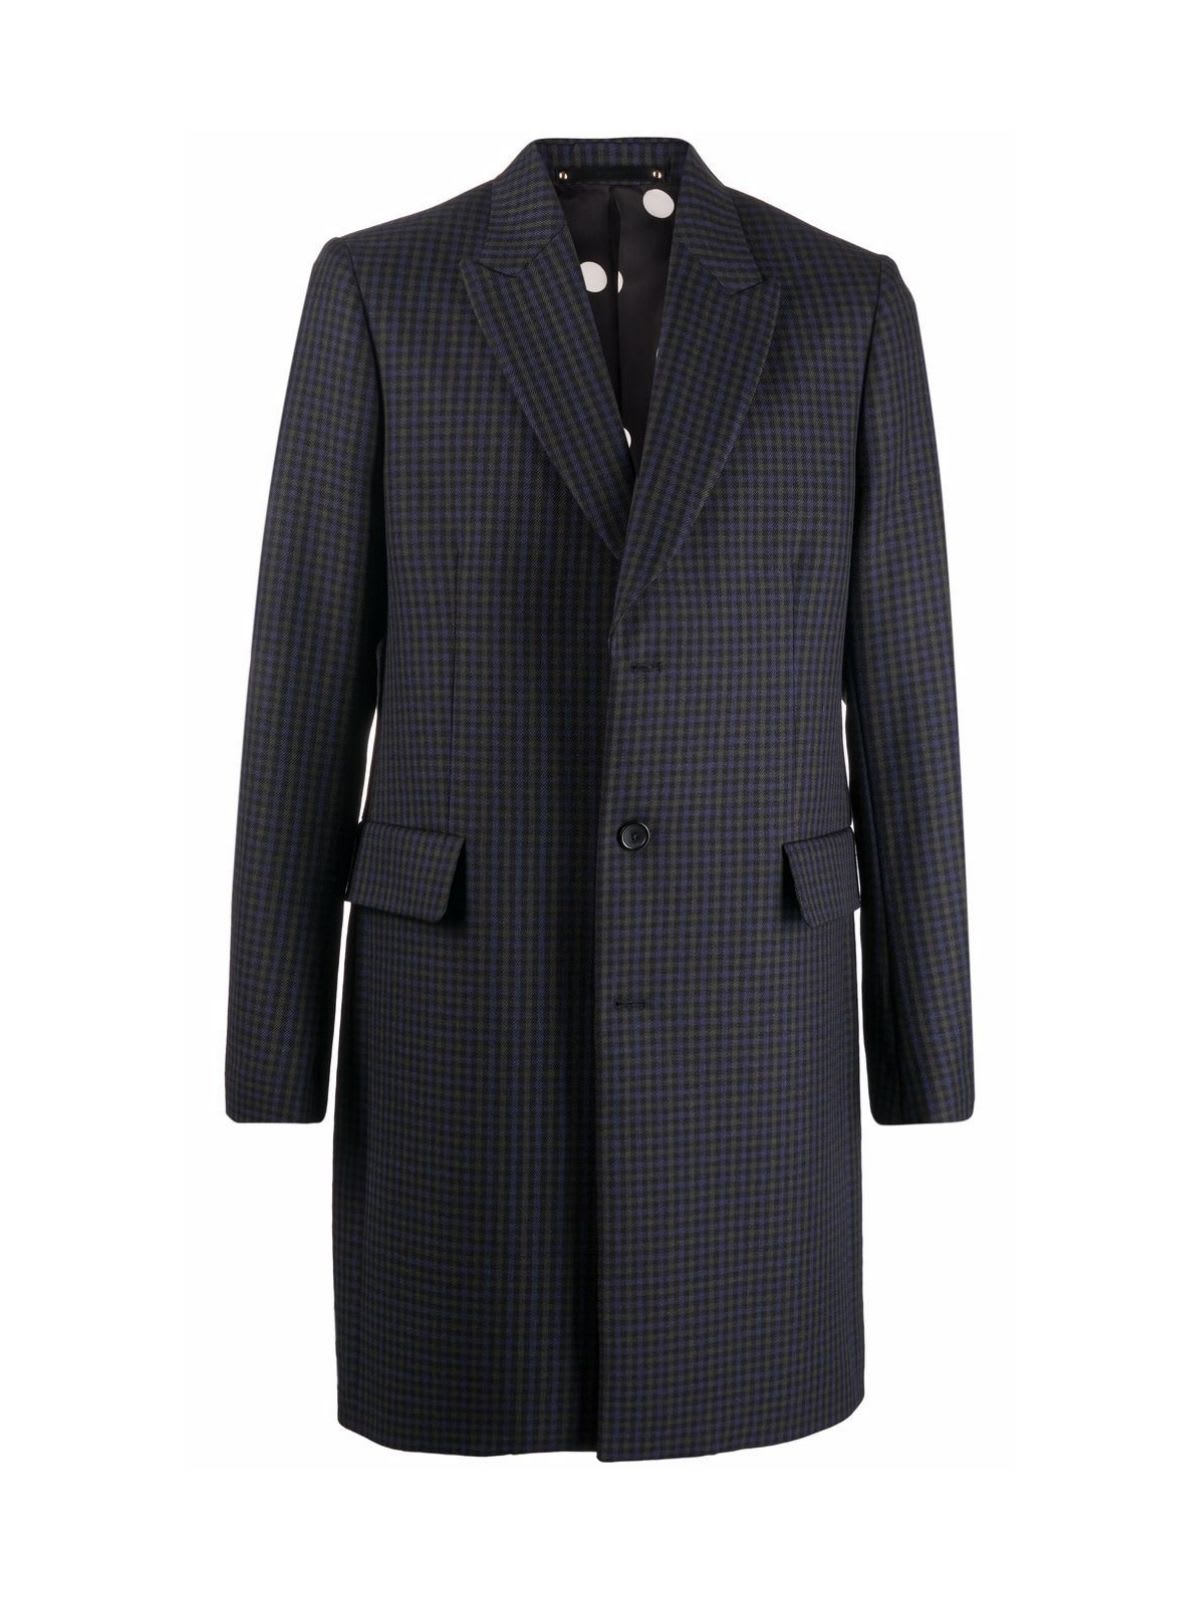 Paul Smith Gents Single Breasted Overcoat